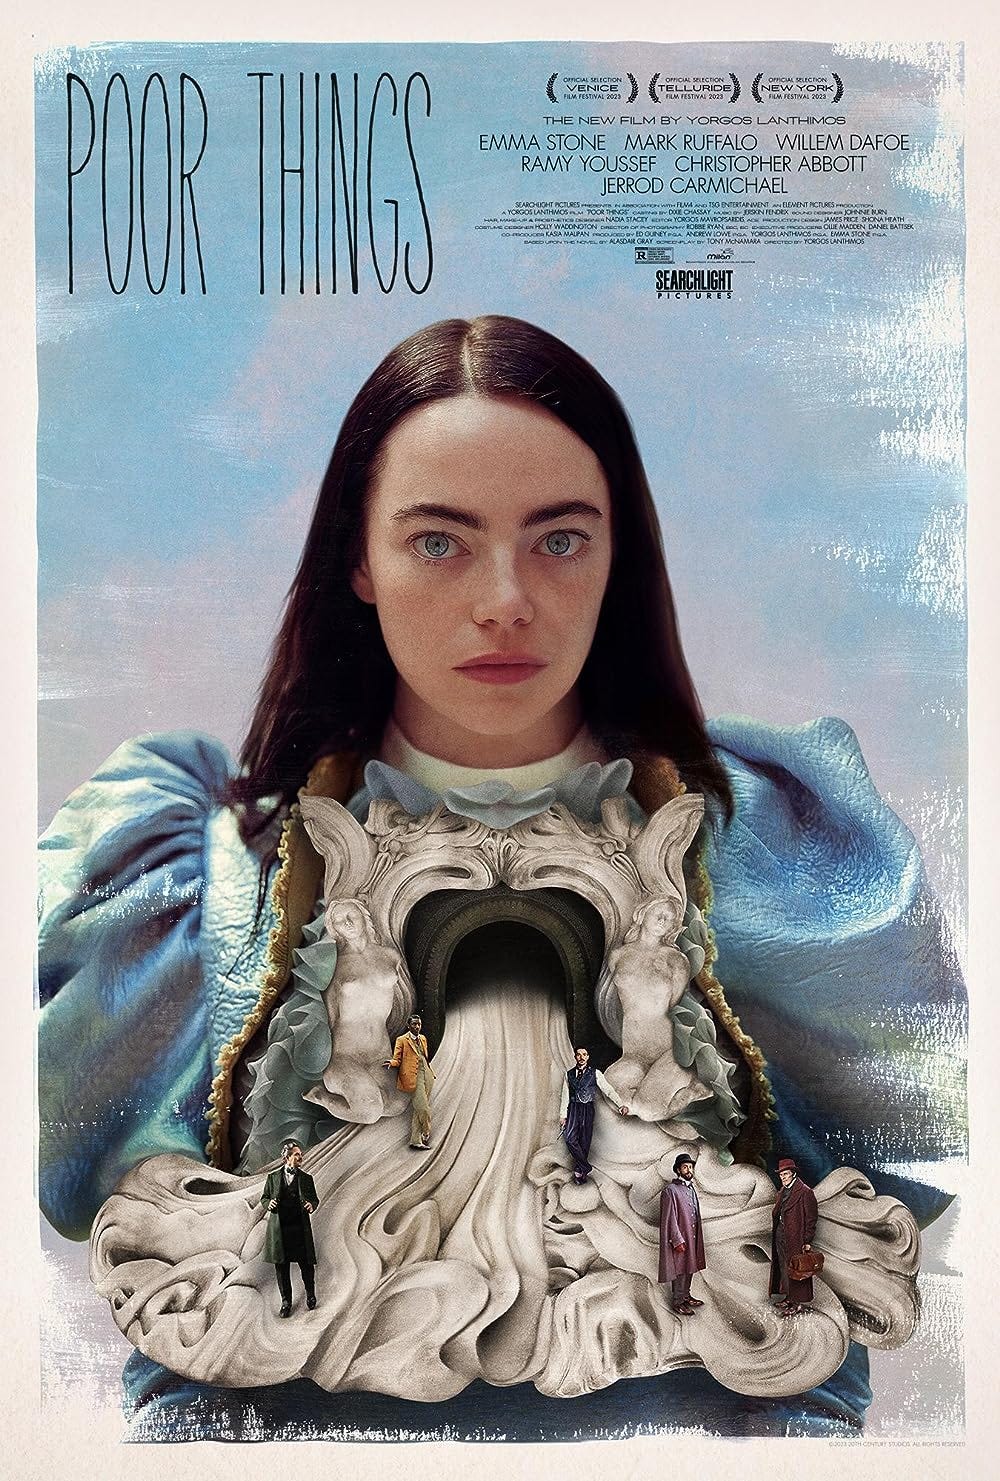 A poster for the movie Poor Things featuring Emma Stone